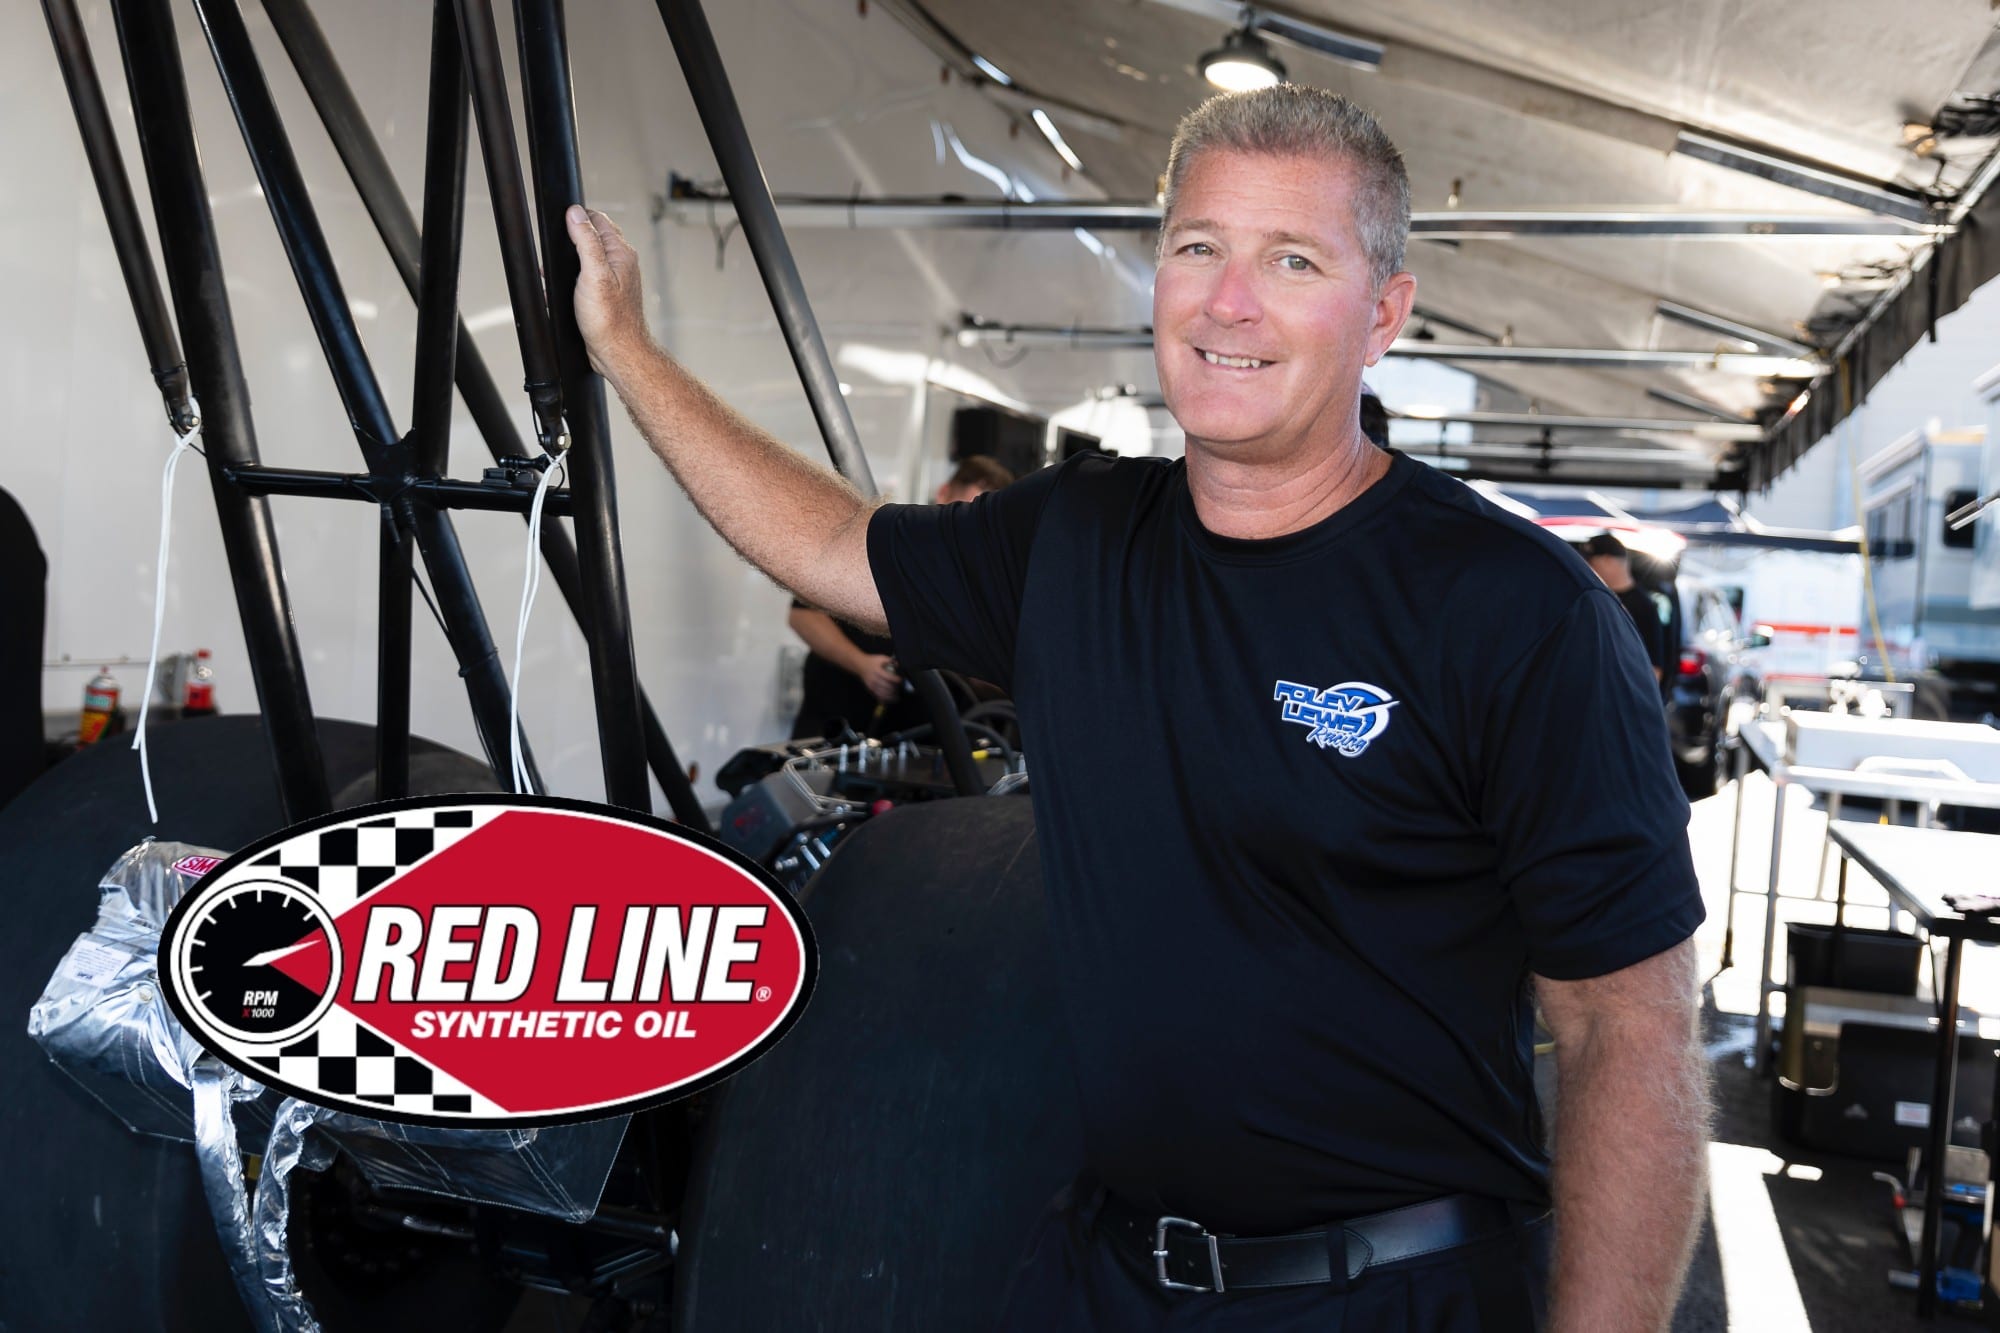 Red Line Oil will be the primary sponsor of Top Fuel driver Doug Foley this weekend during the U.S. Nationals.